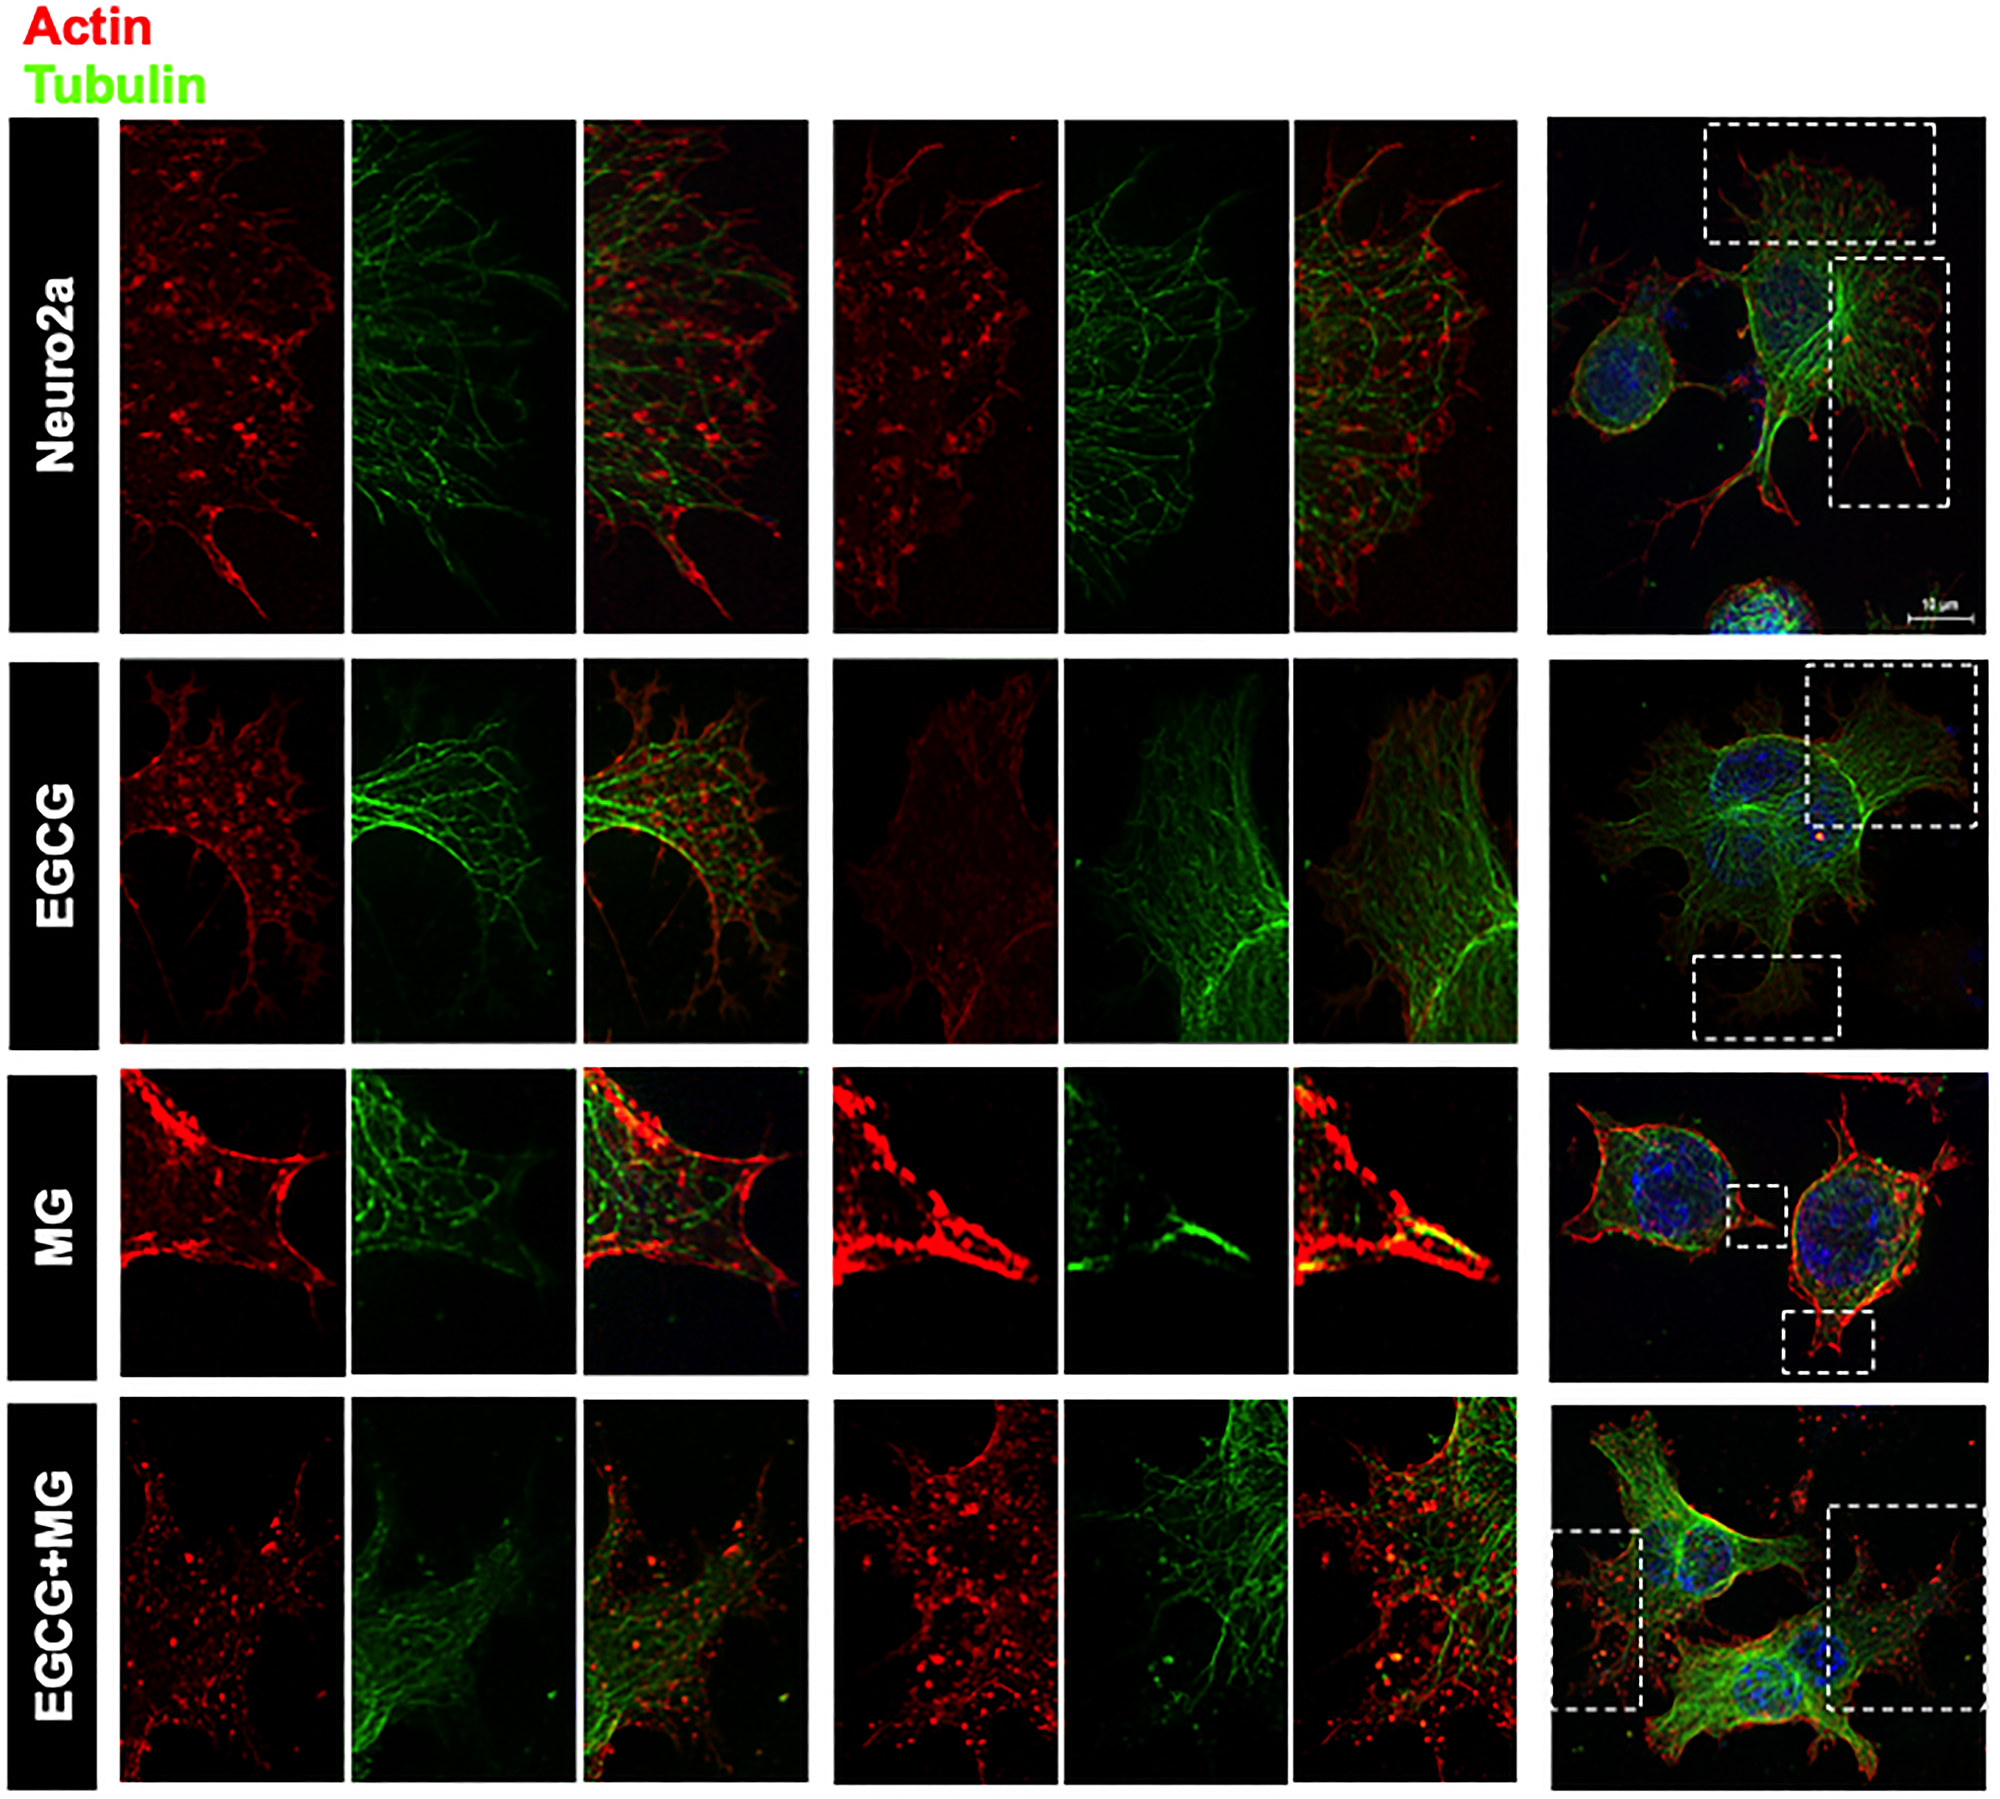 Super-resolution microscopy images for detailed analysis of cytoskeleton.